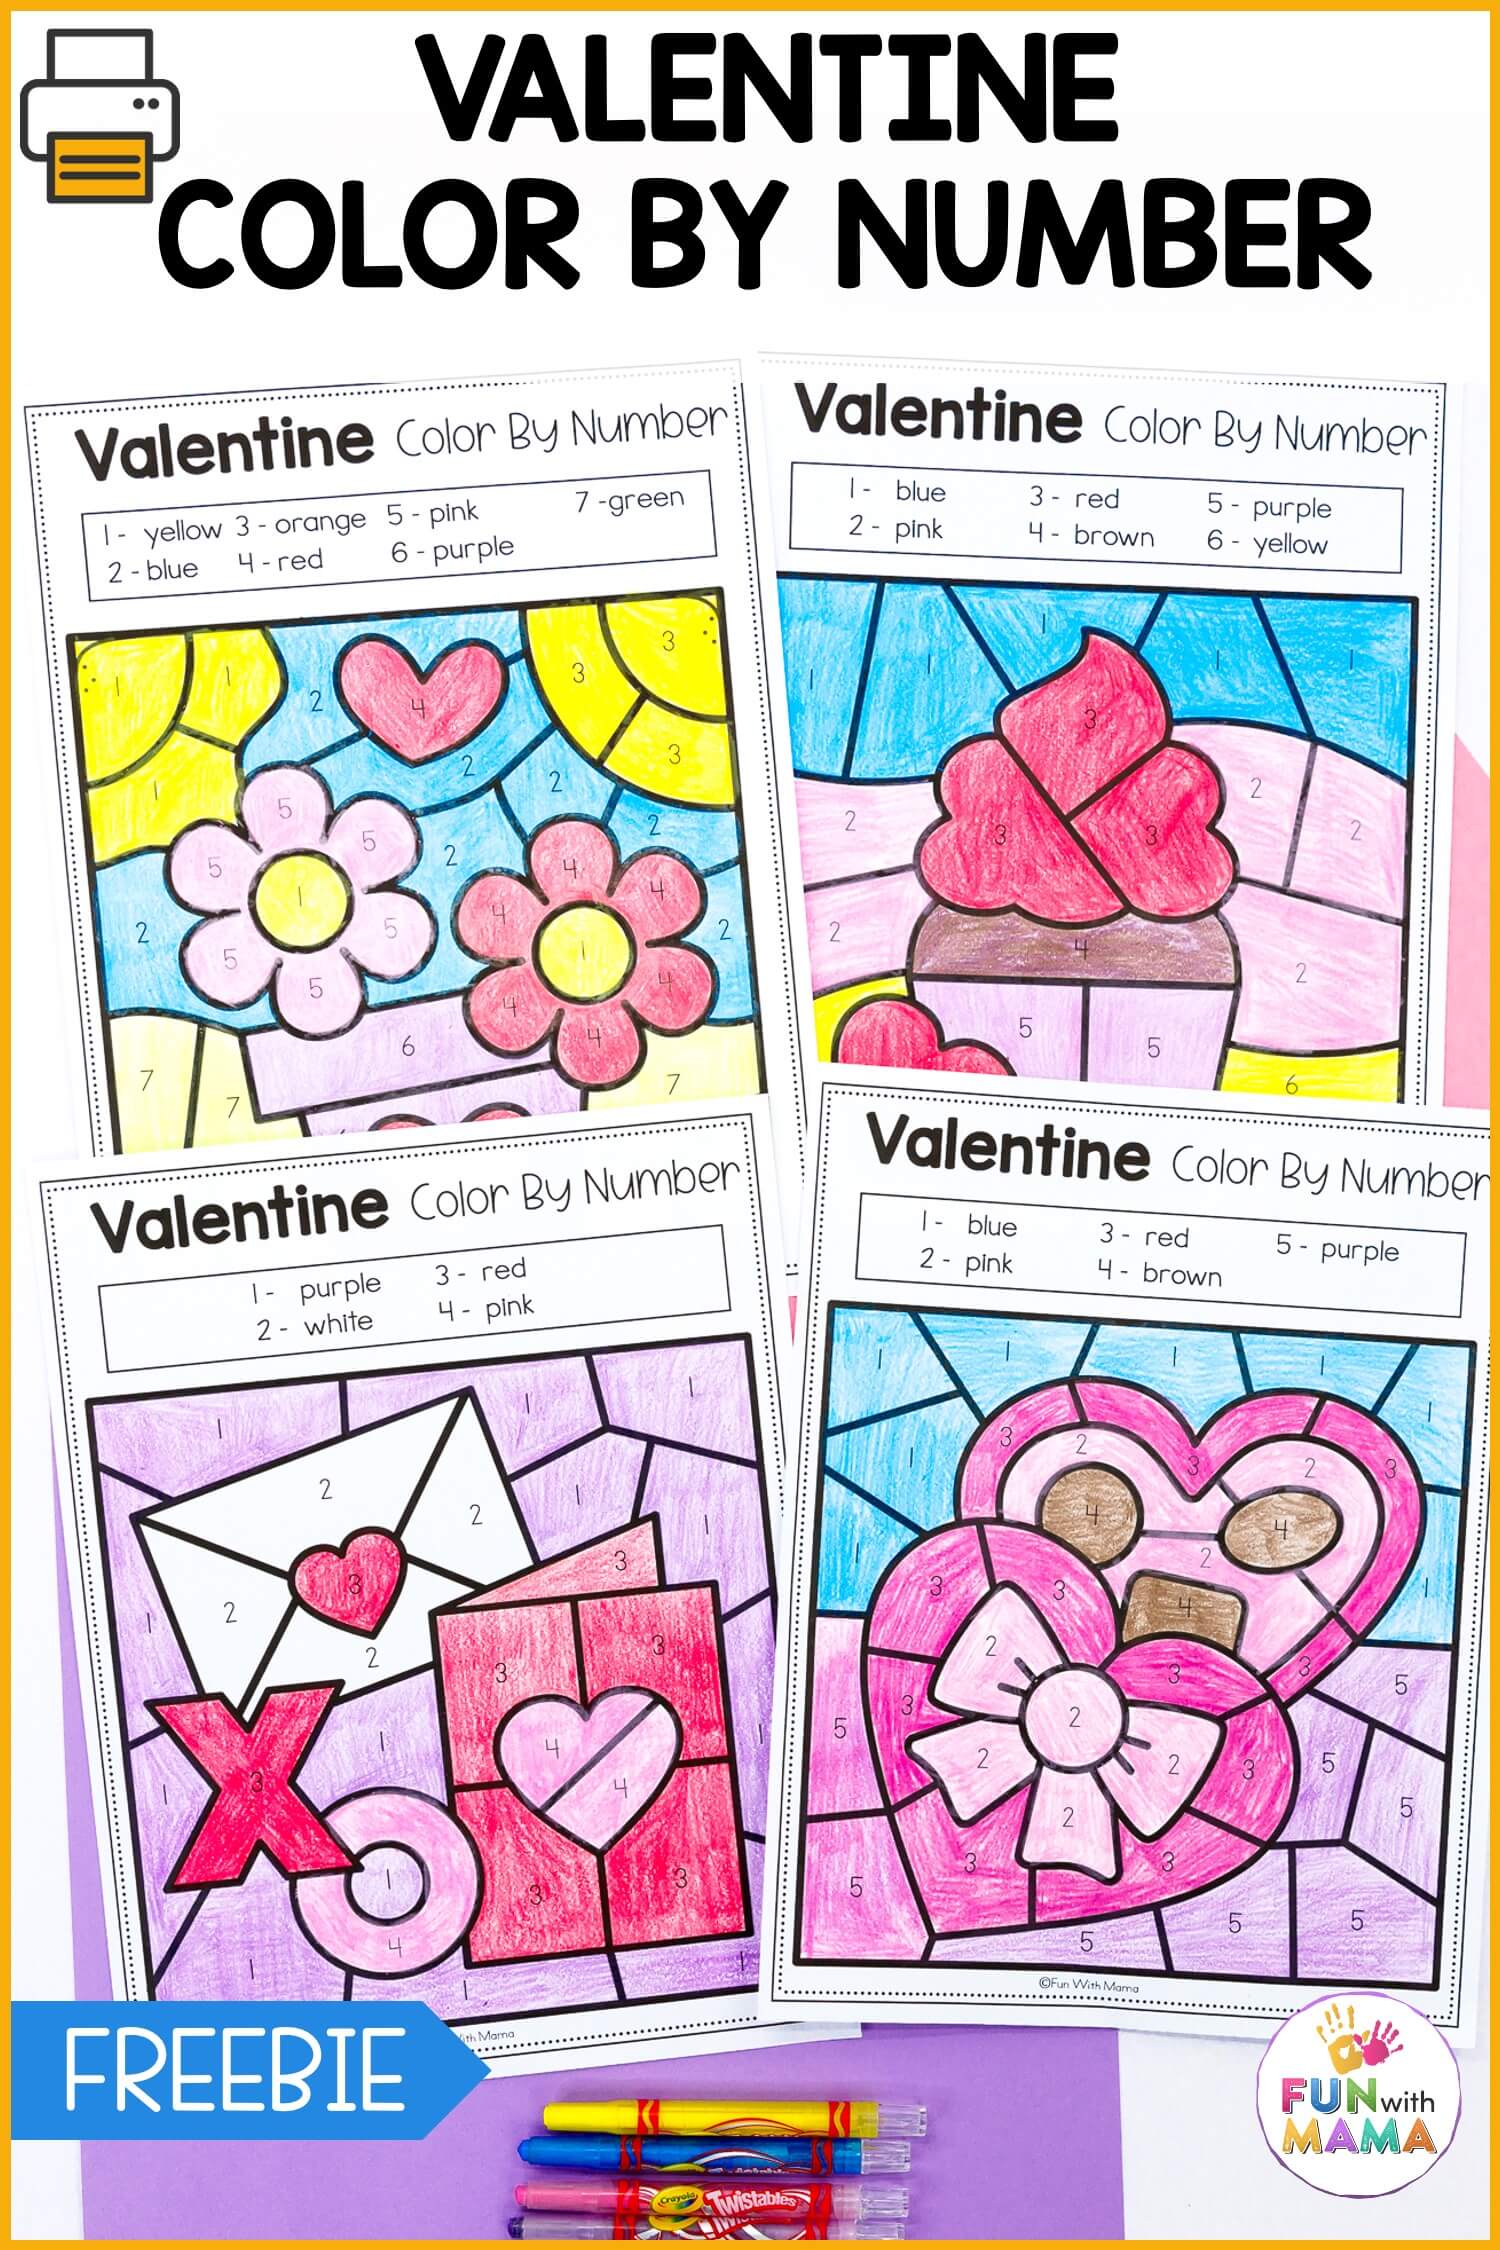 valentine-color-by-number